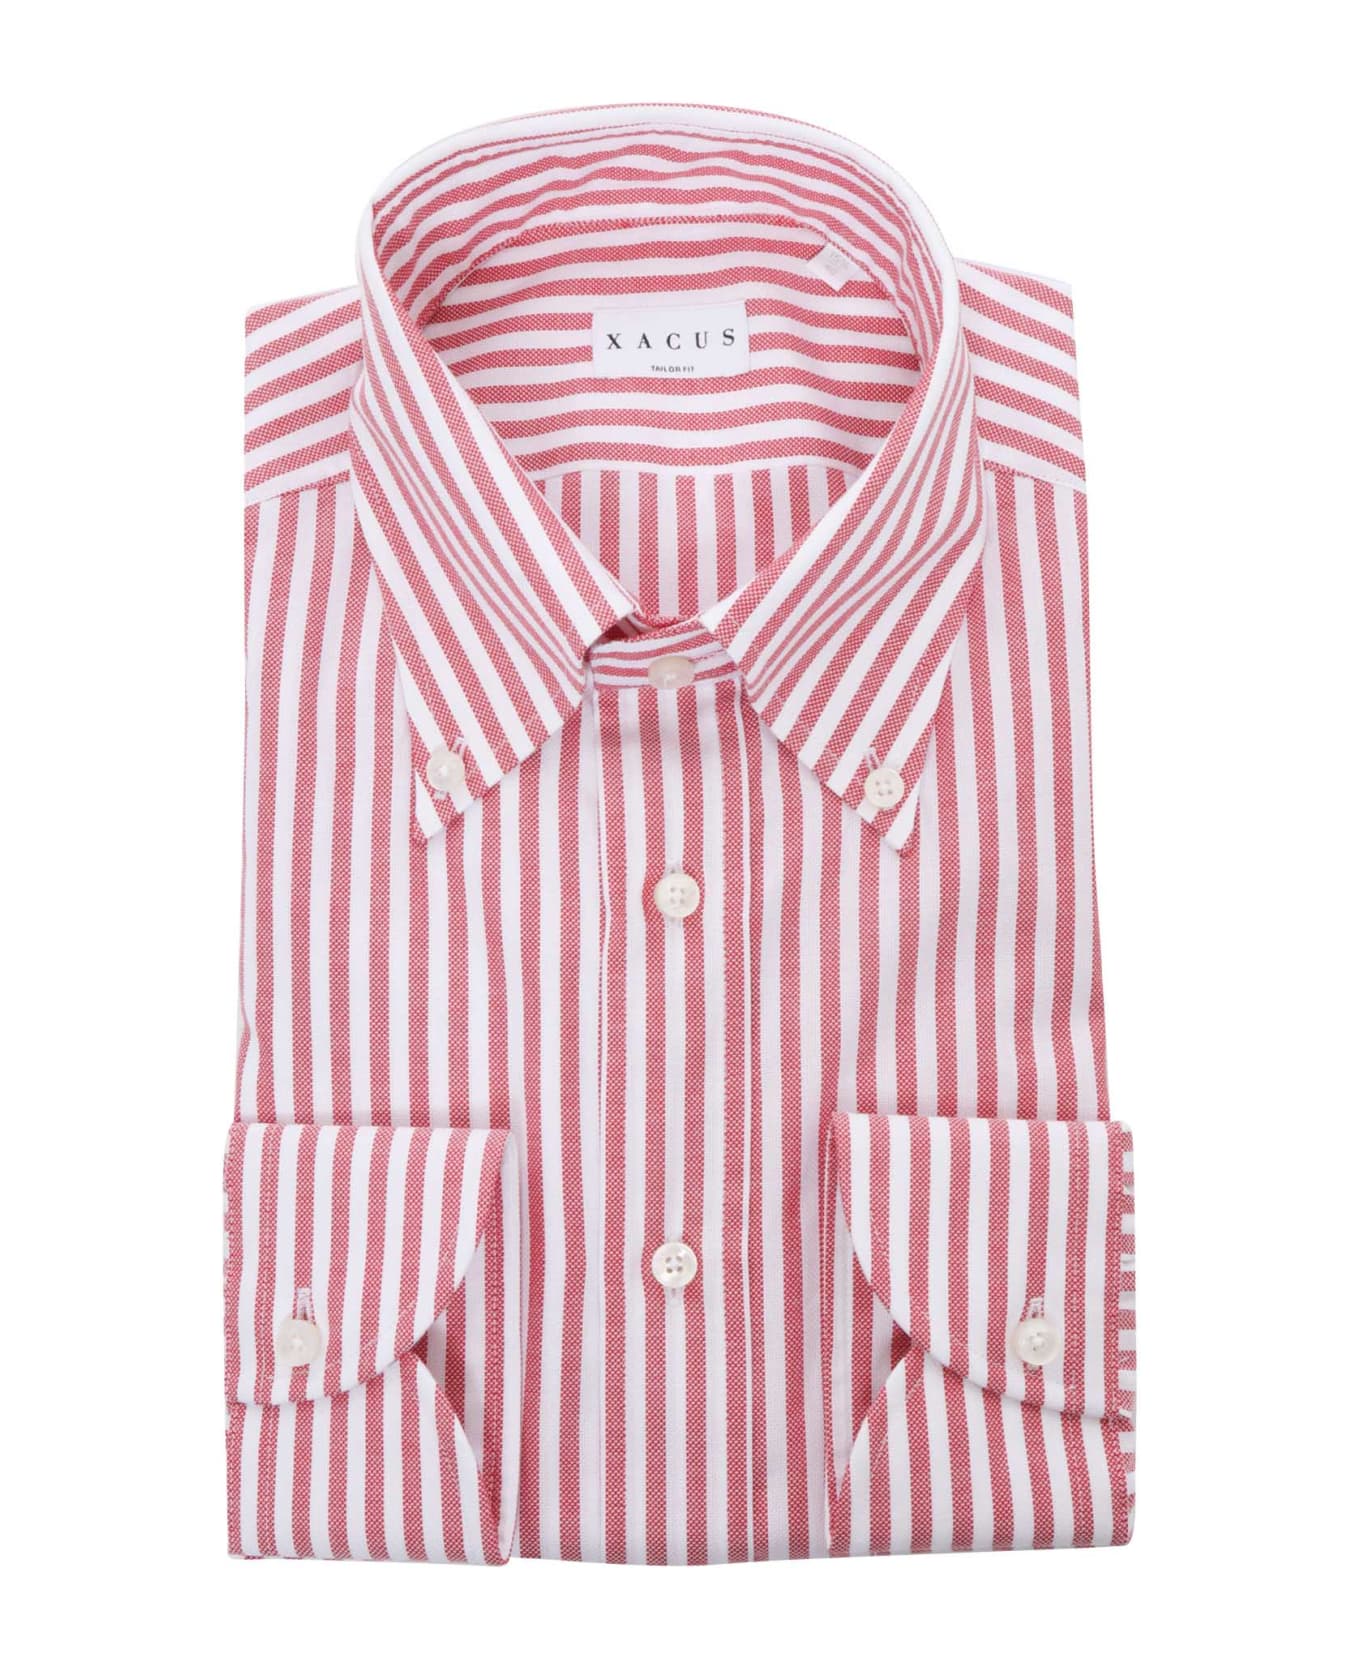 Xacus Red Striped Shirt - MULTICOLOR シャツ